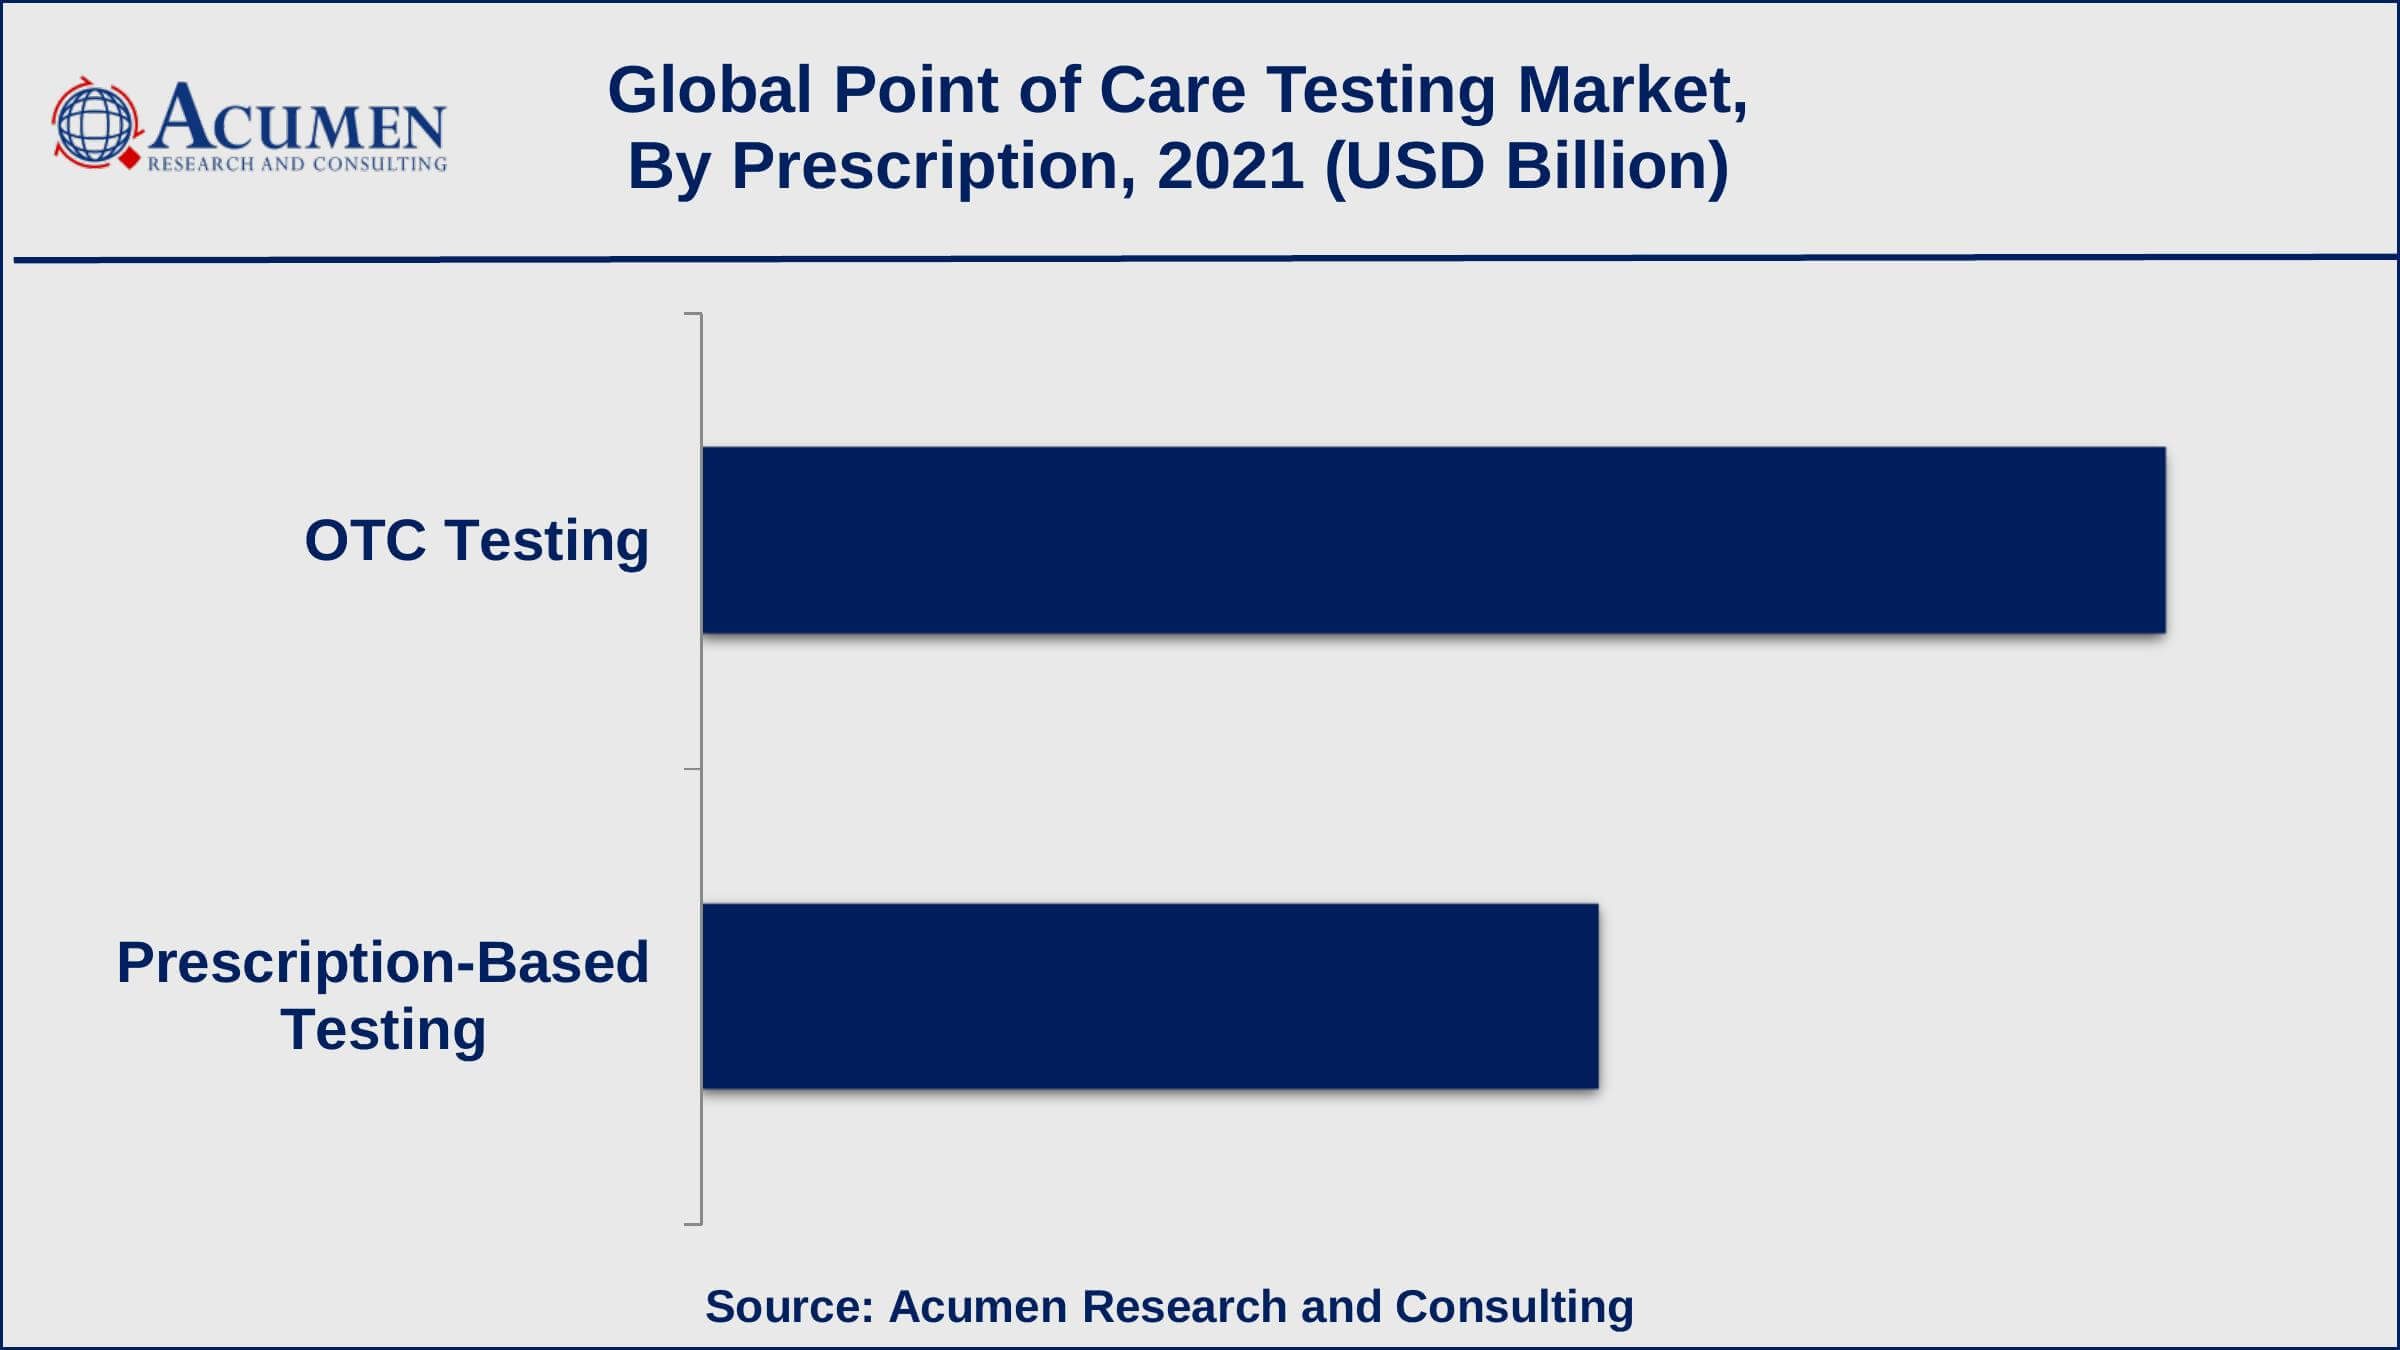 Among prescription, OTC testing generated shares of over 60% in 2021